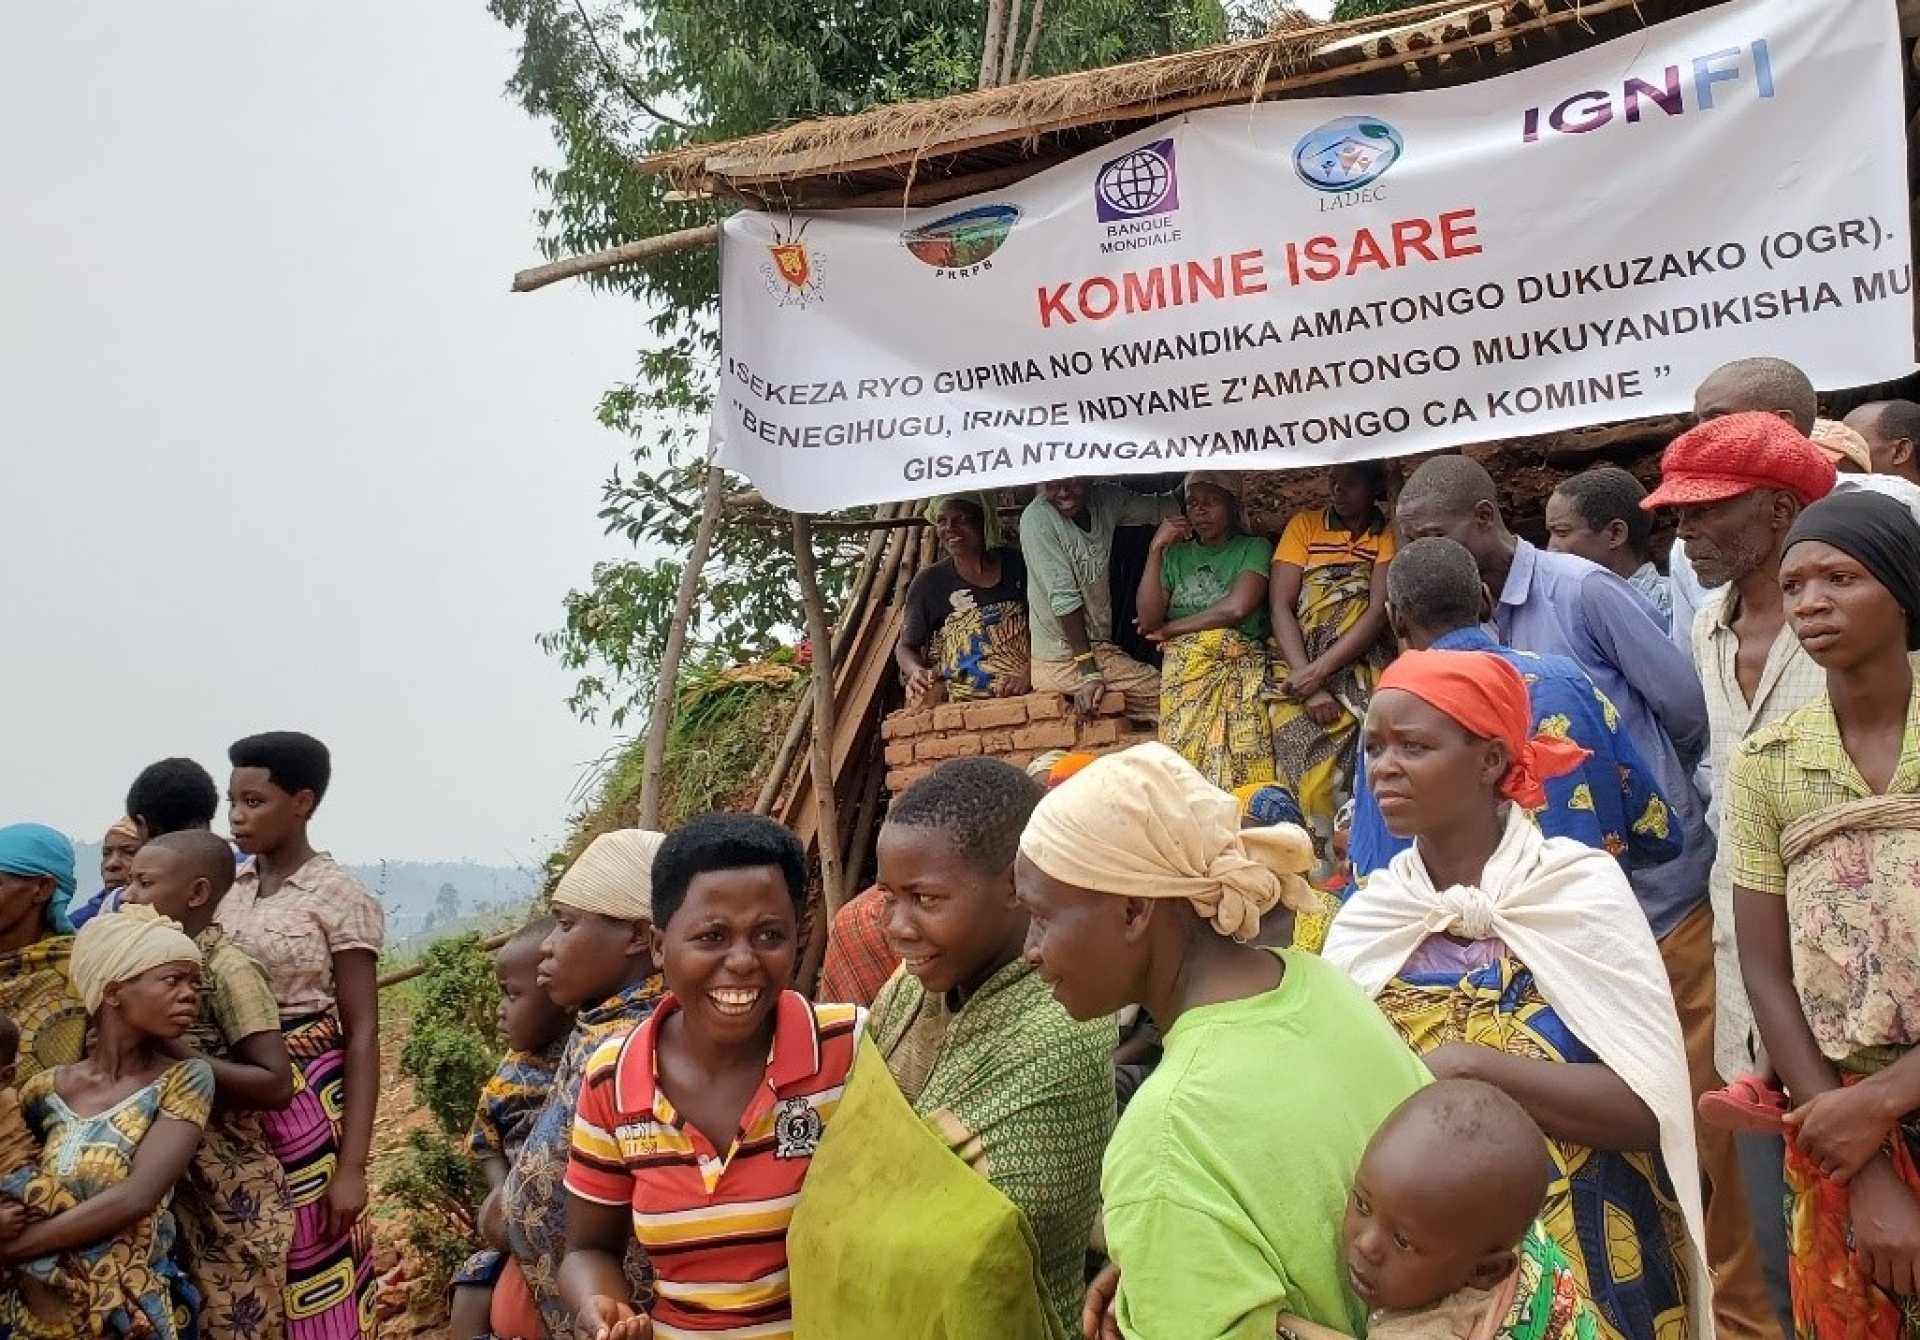 OFFICIAL OPENING OF LAND SERVICES AND LAUNCH OF GROUPED OPERATIONS RECOGNITION IN ISARE AND BUHINYUZA COMMUNES